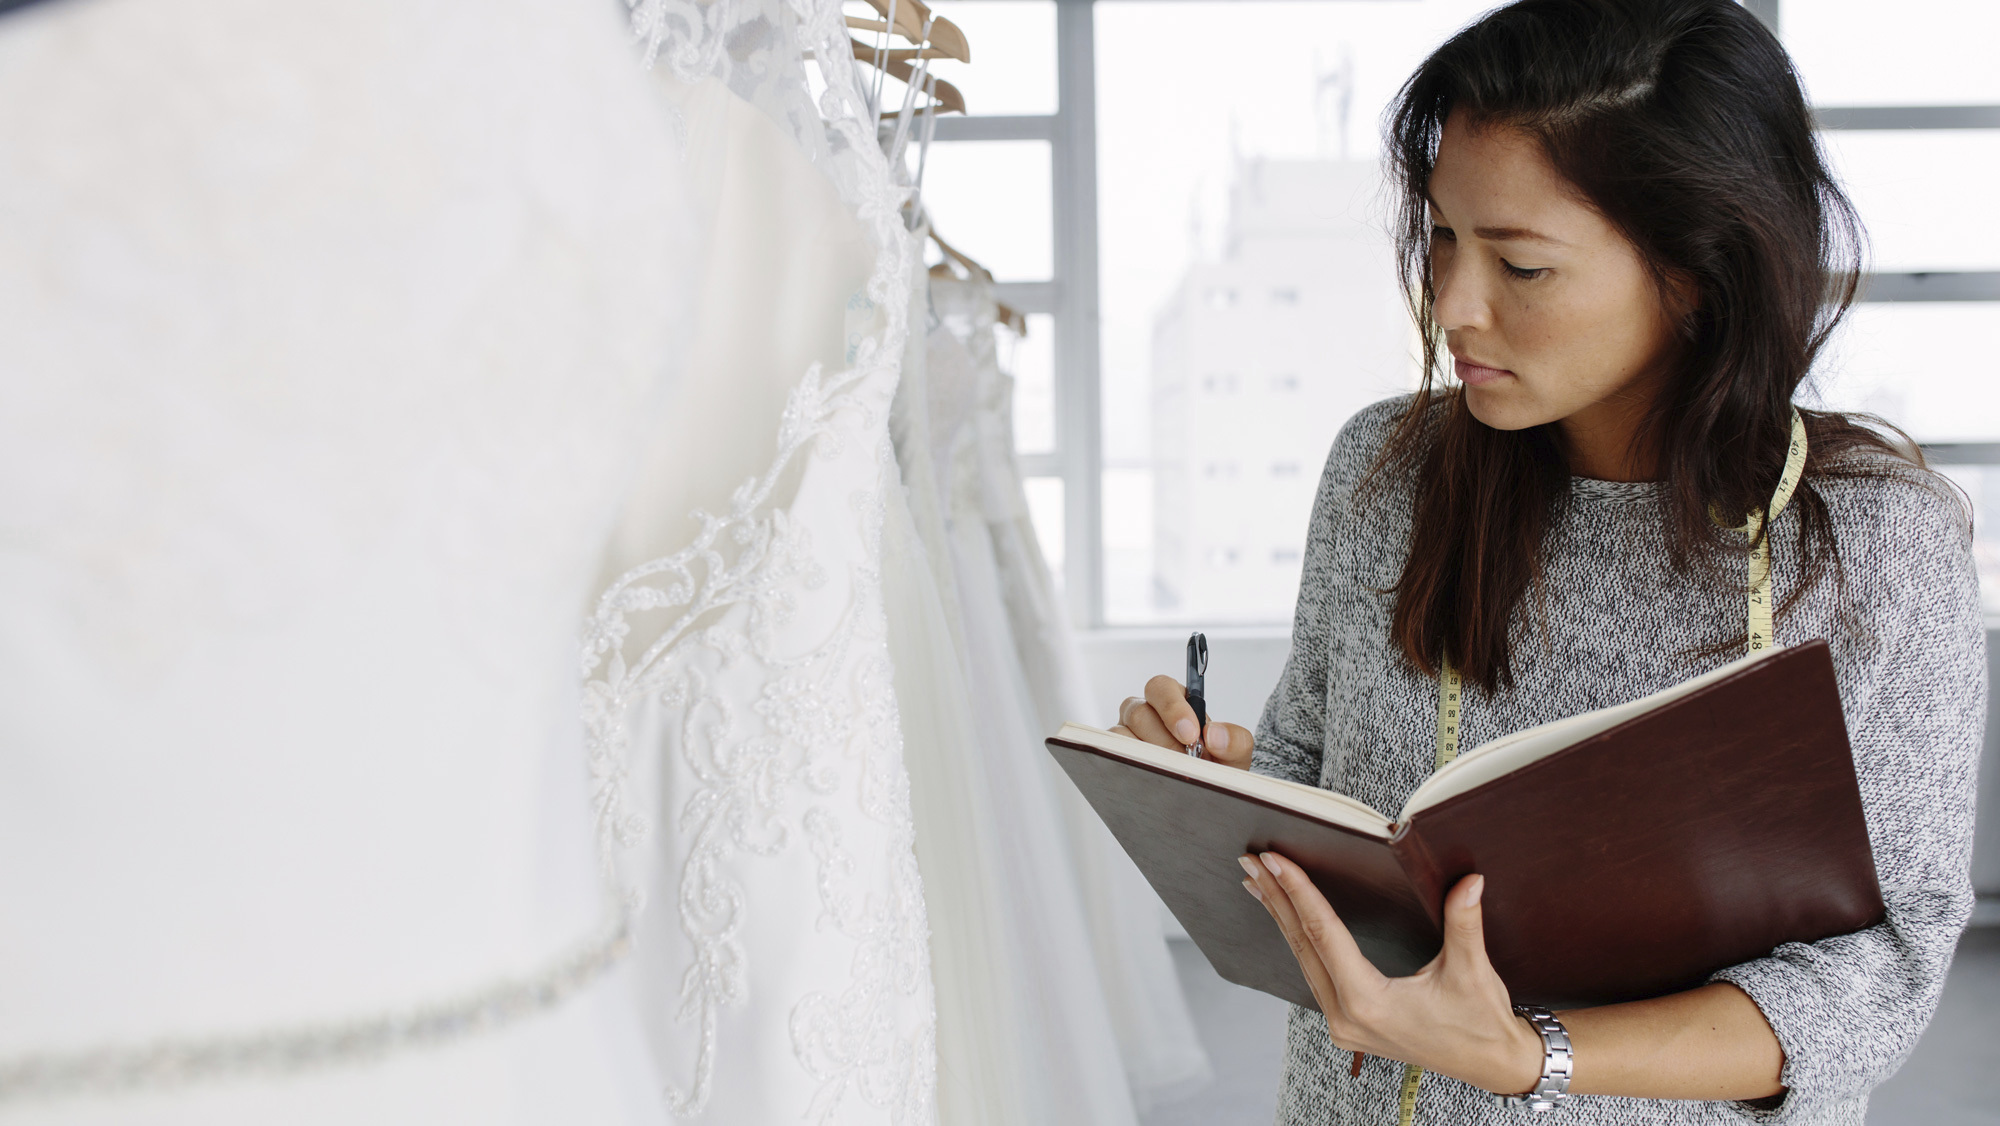 woman looking at notebook in wedding dress shop